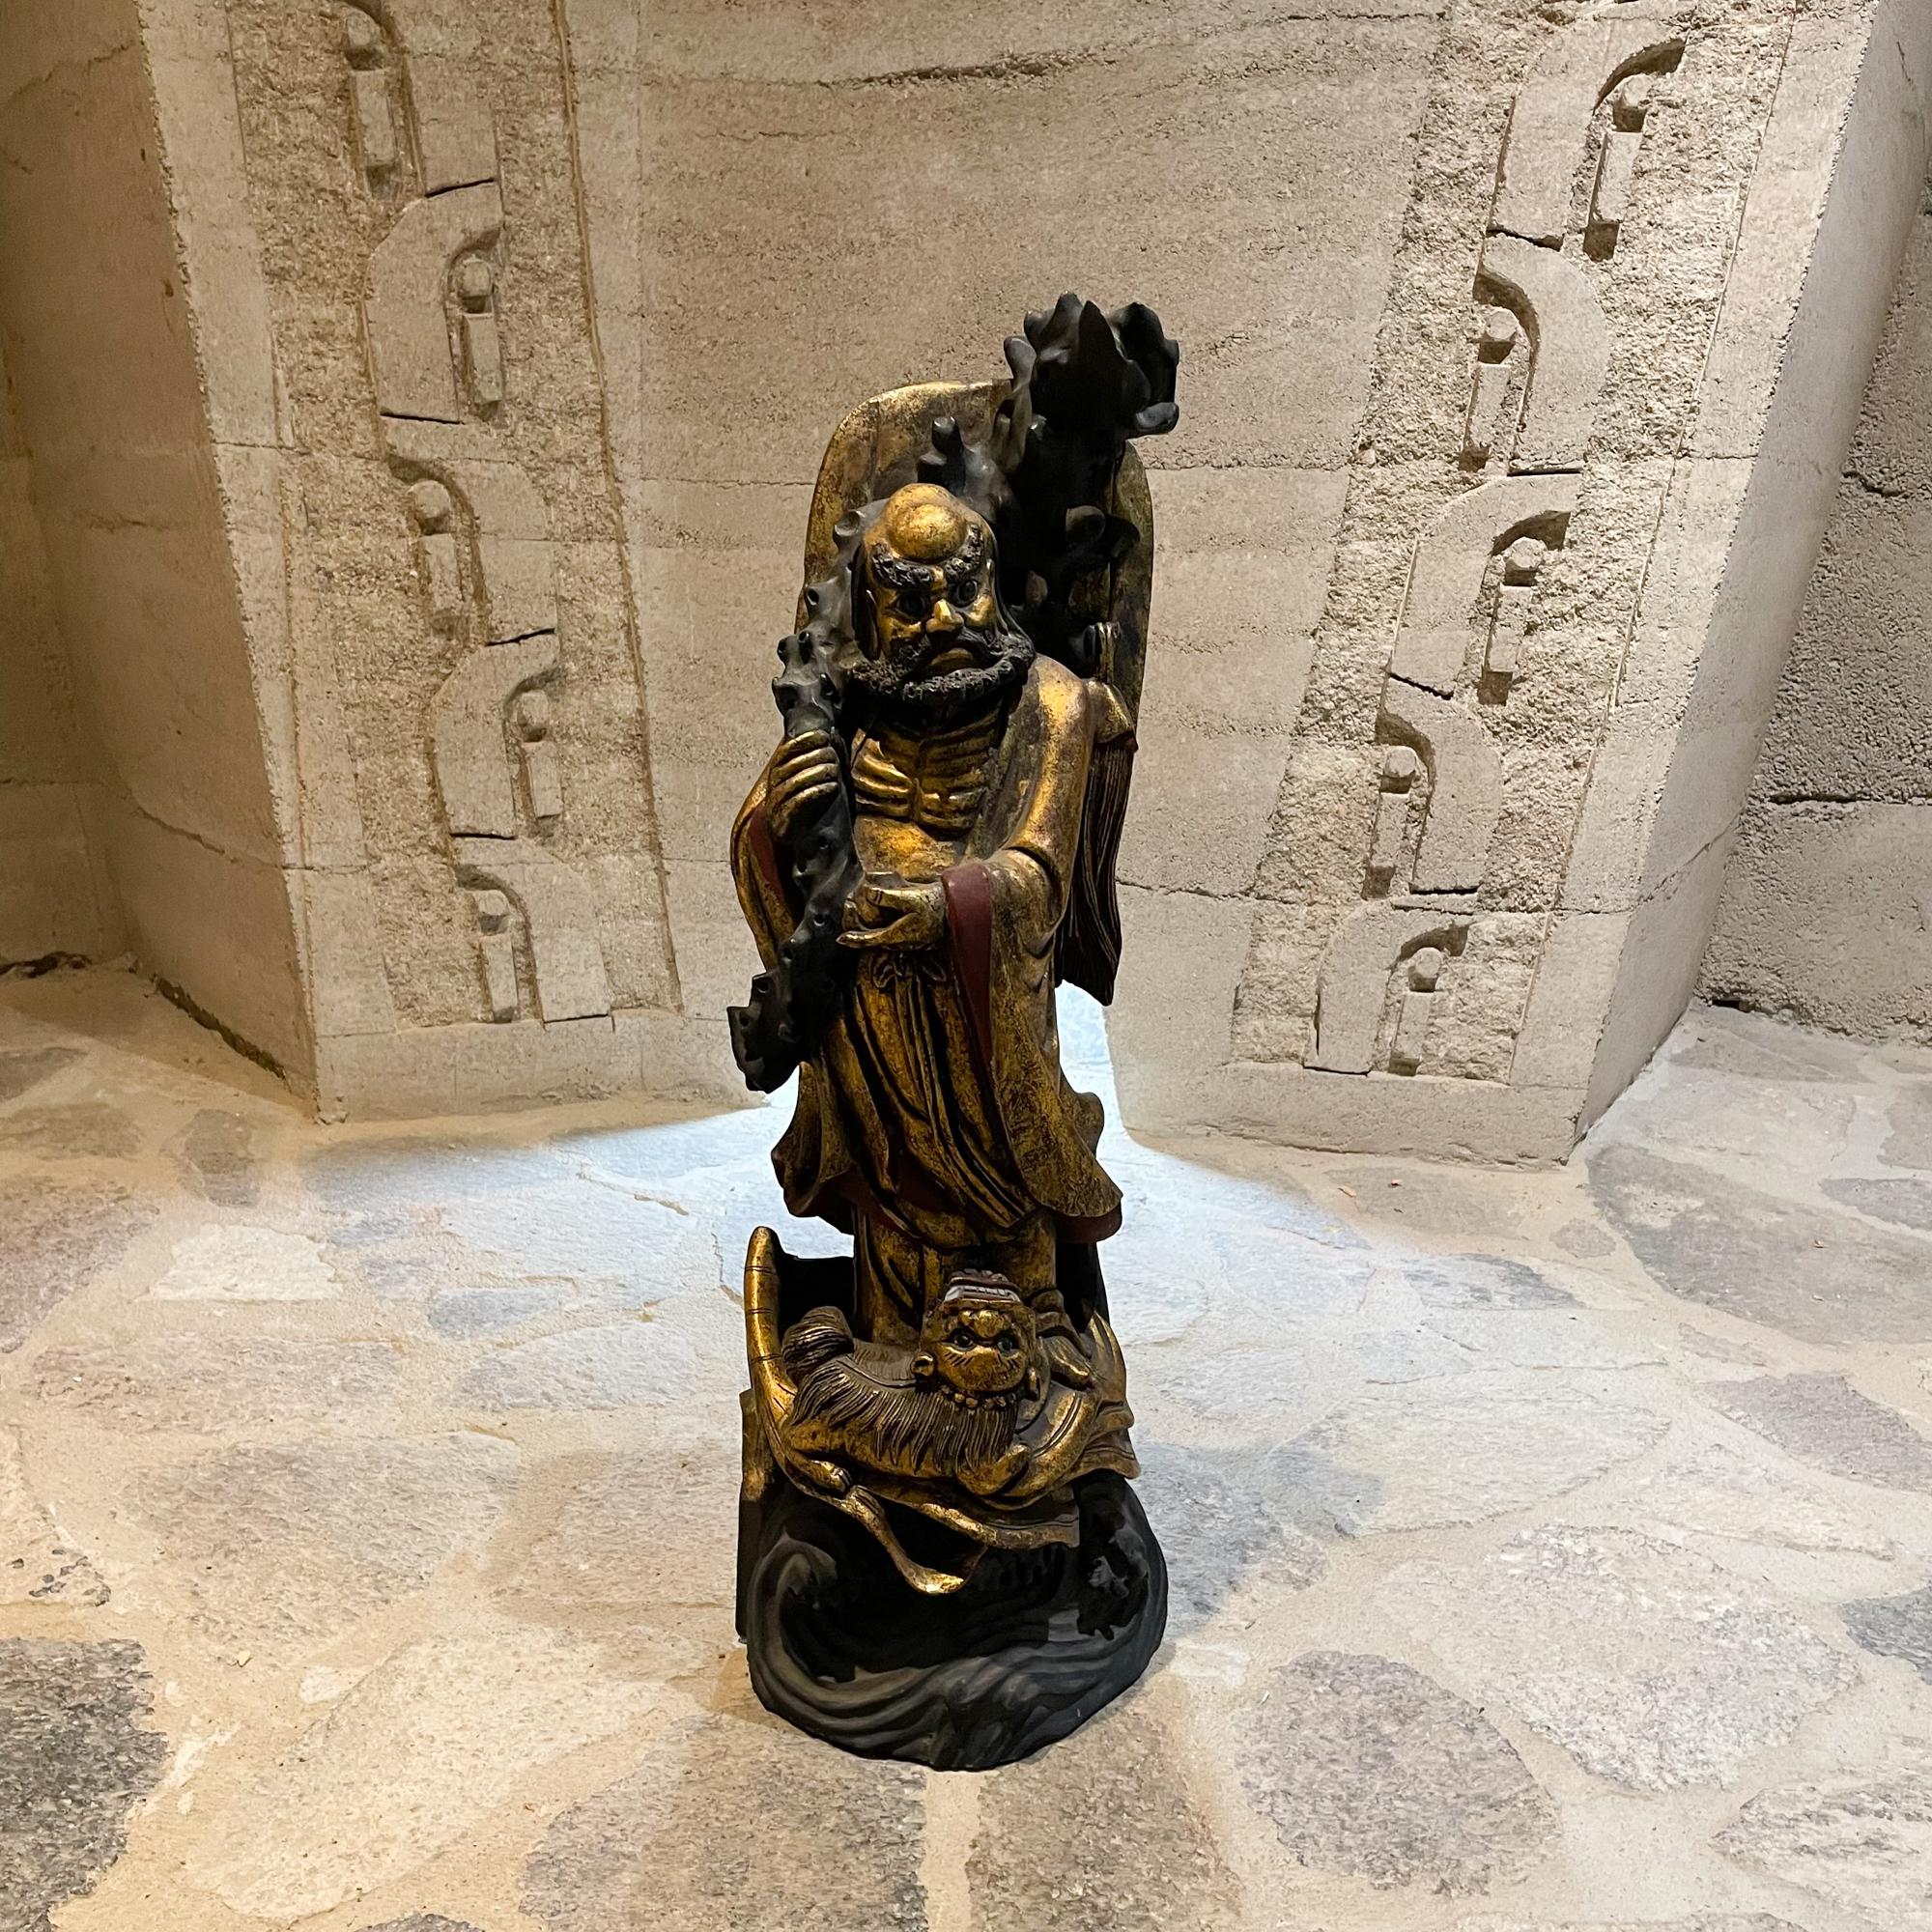 Intricately carved wood sculpture Chinese Immortal Longevity Buddha Deity figure crafted with gold gilt and a black finish with foo dog at base.
Measures: 28.5 T x 7.5 D x 10 W inches
Original Preowned Vintage Unrestored Condition. 
Refer to